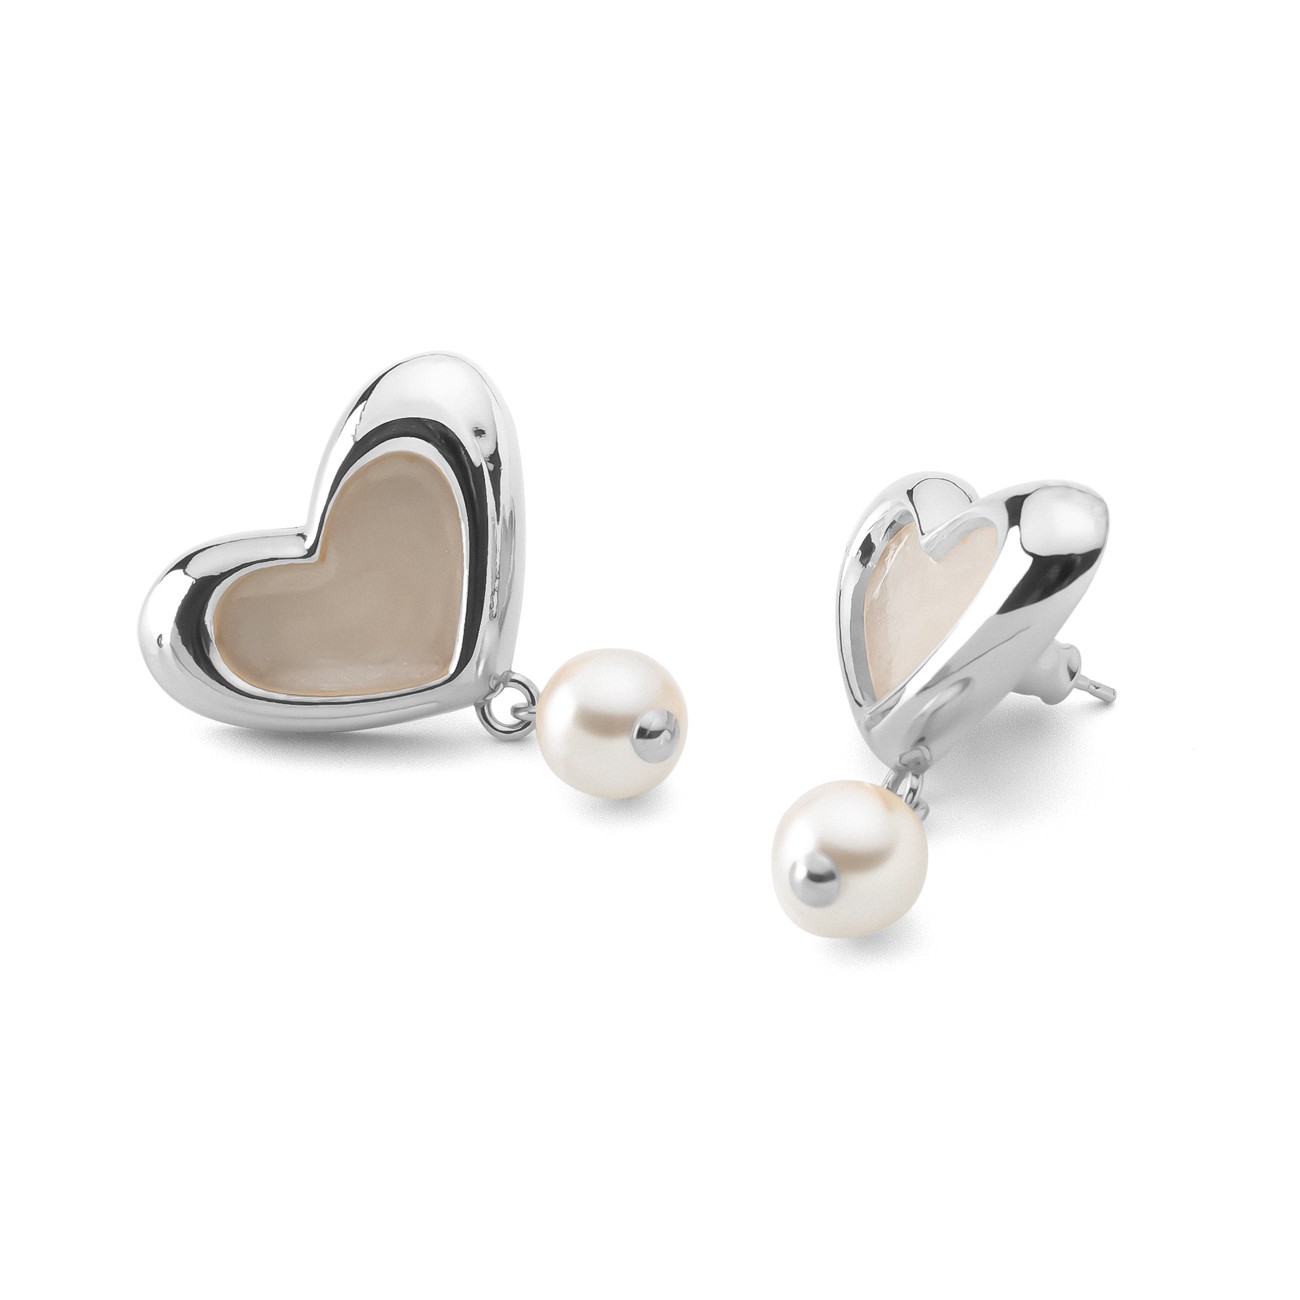 Heart earrings with white resin and pearl, sterling silver 925